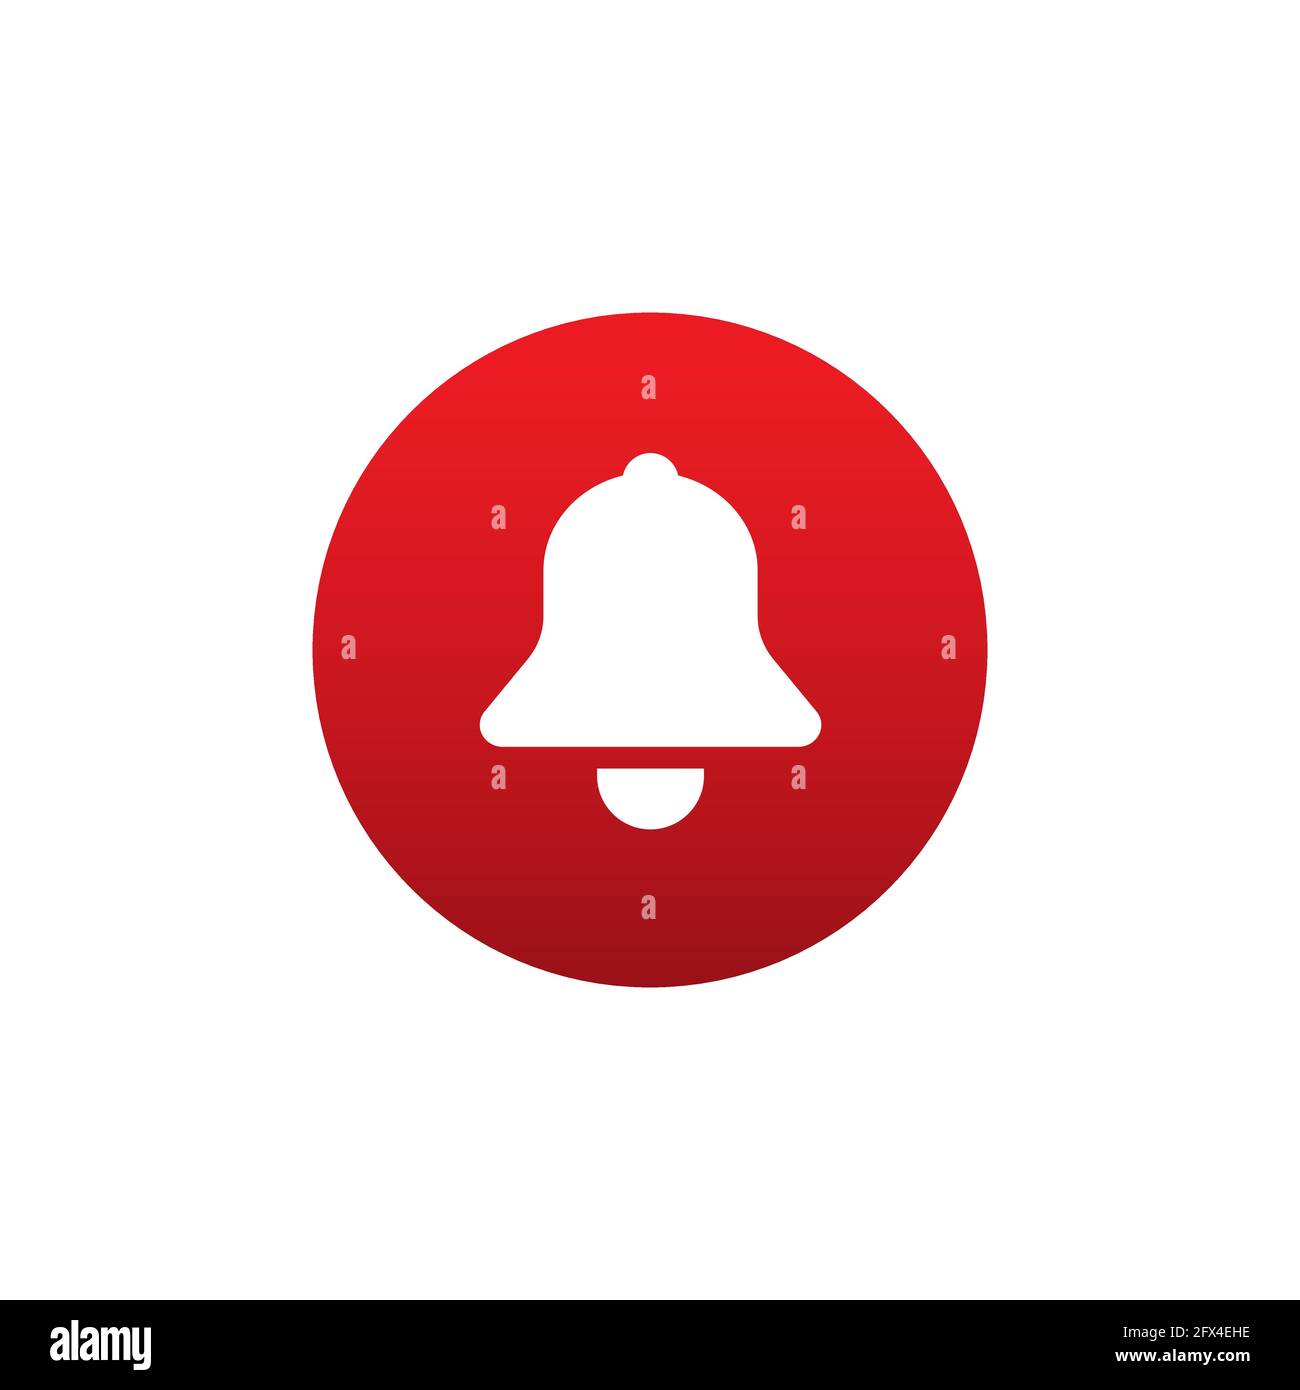 White bell on red round background button for apps like youtube, alert ringing or subscriber alarm symbol Stock Vector